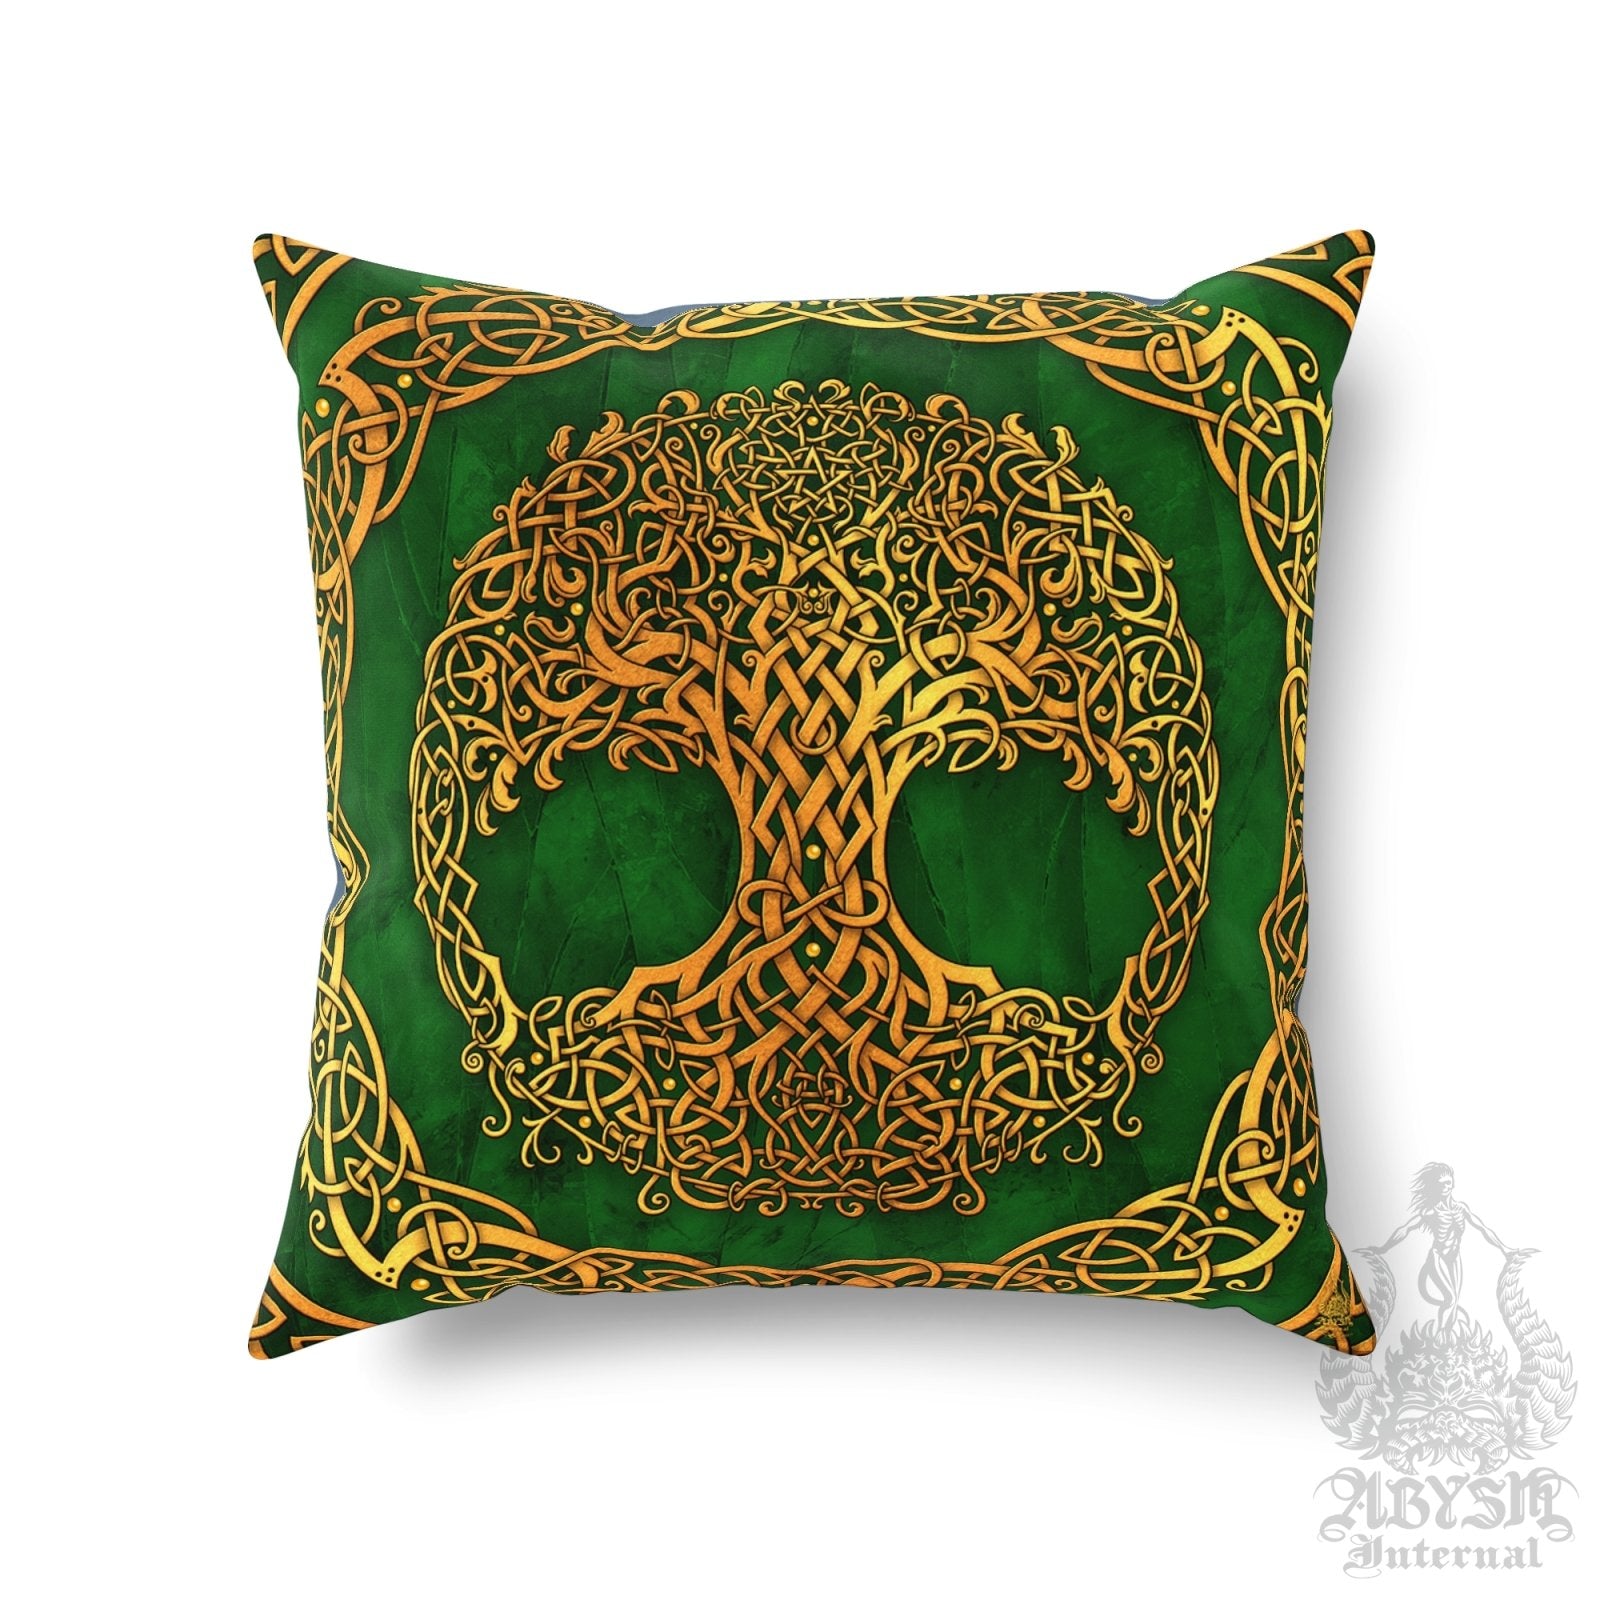 Celtic Throw Pillow, Decorative Accent Cushion, Tree of Life, Pagan Room Decor, Witchy Art, Funky and Eclectic Home - Gold and Green - Abysm Internal